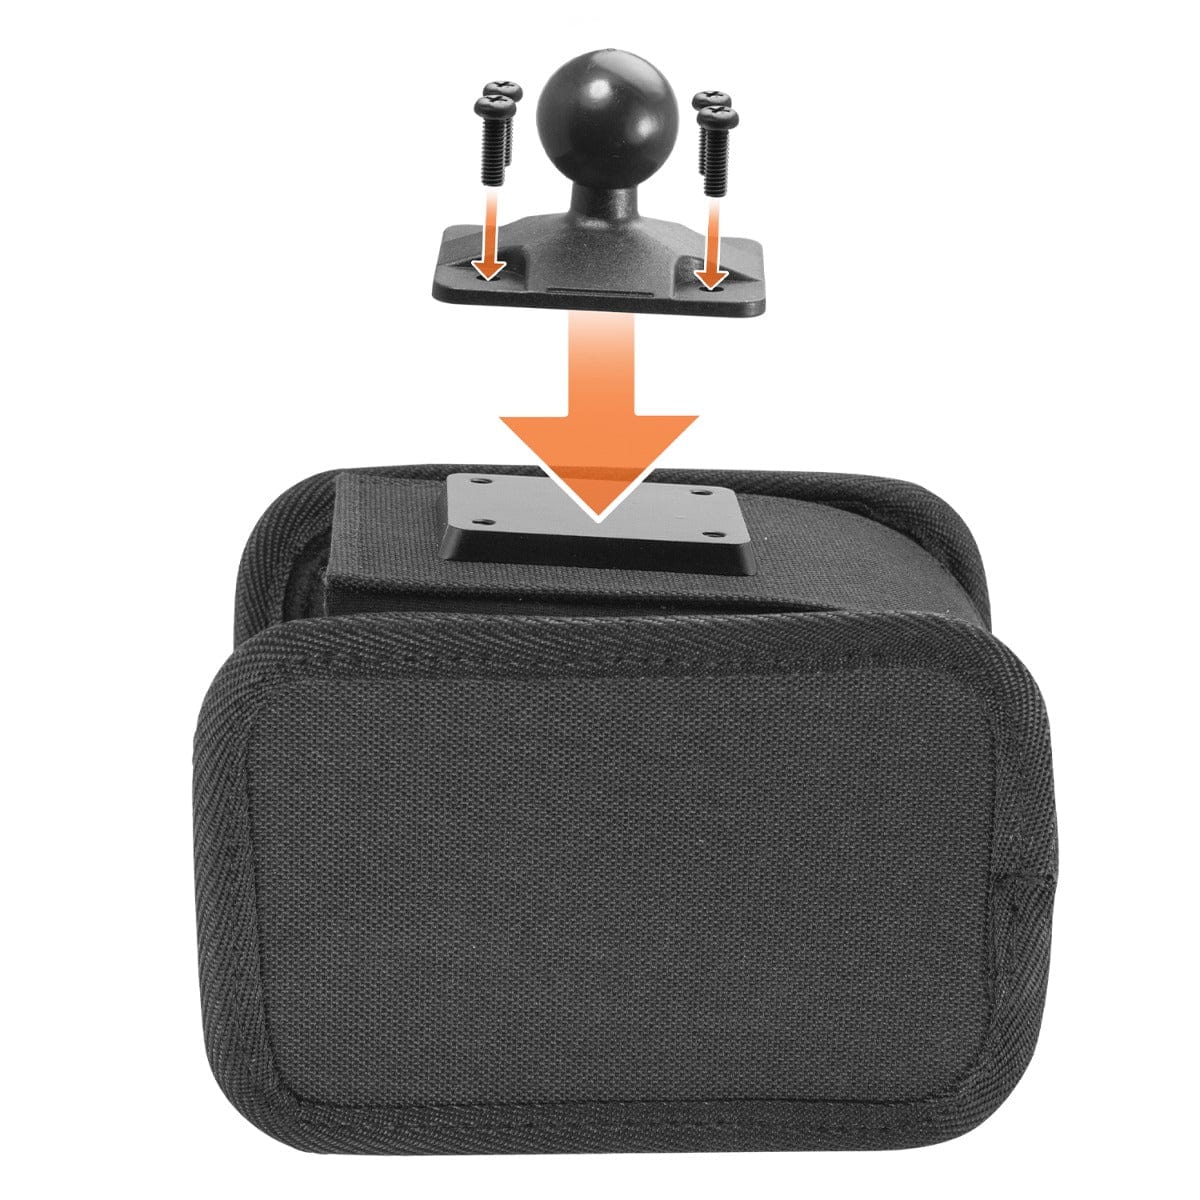 iBOLT Barcode Scanner Holder w/Industry Standard 1 inch / 25 mm Ball Connection